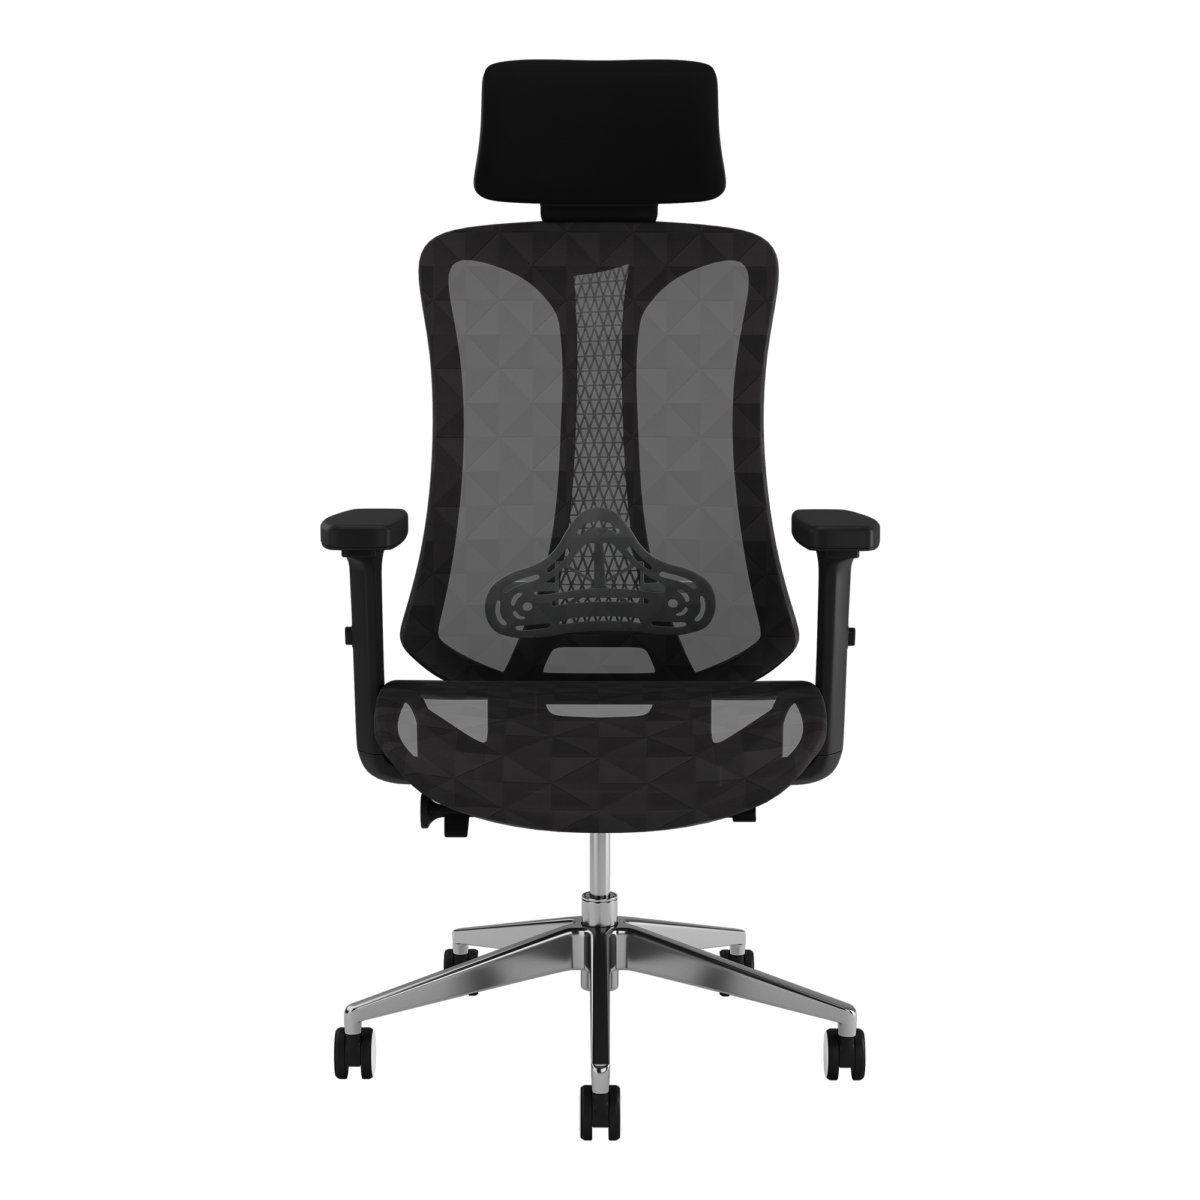 Glide_0003_Glide-gaming-chair0000